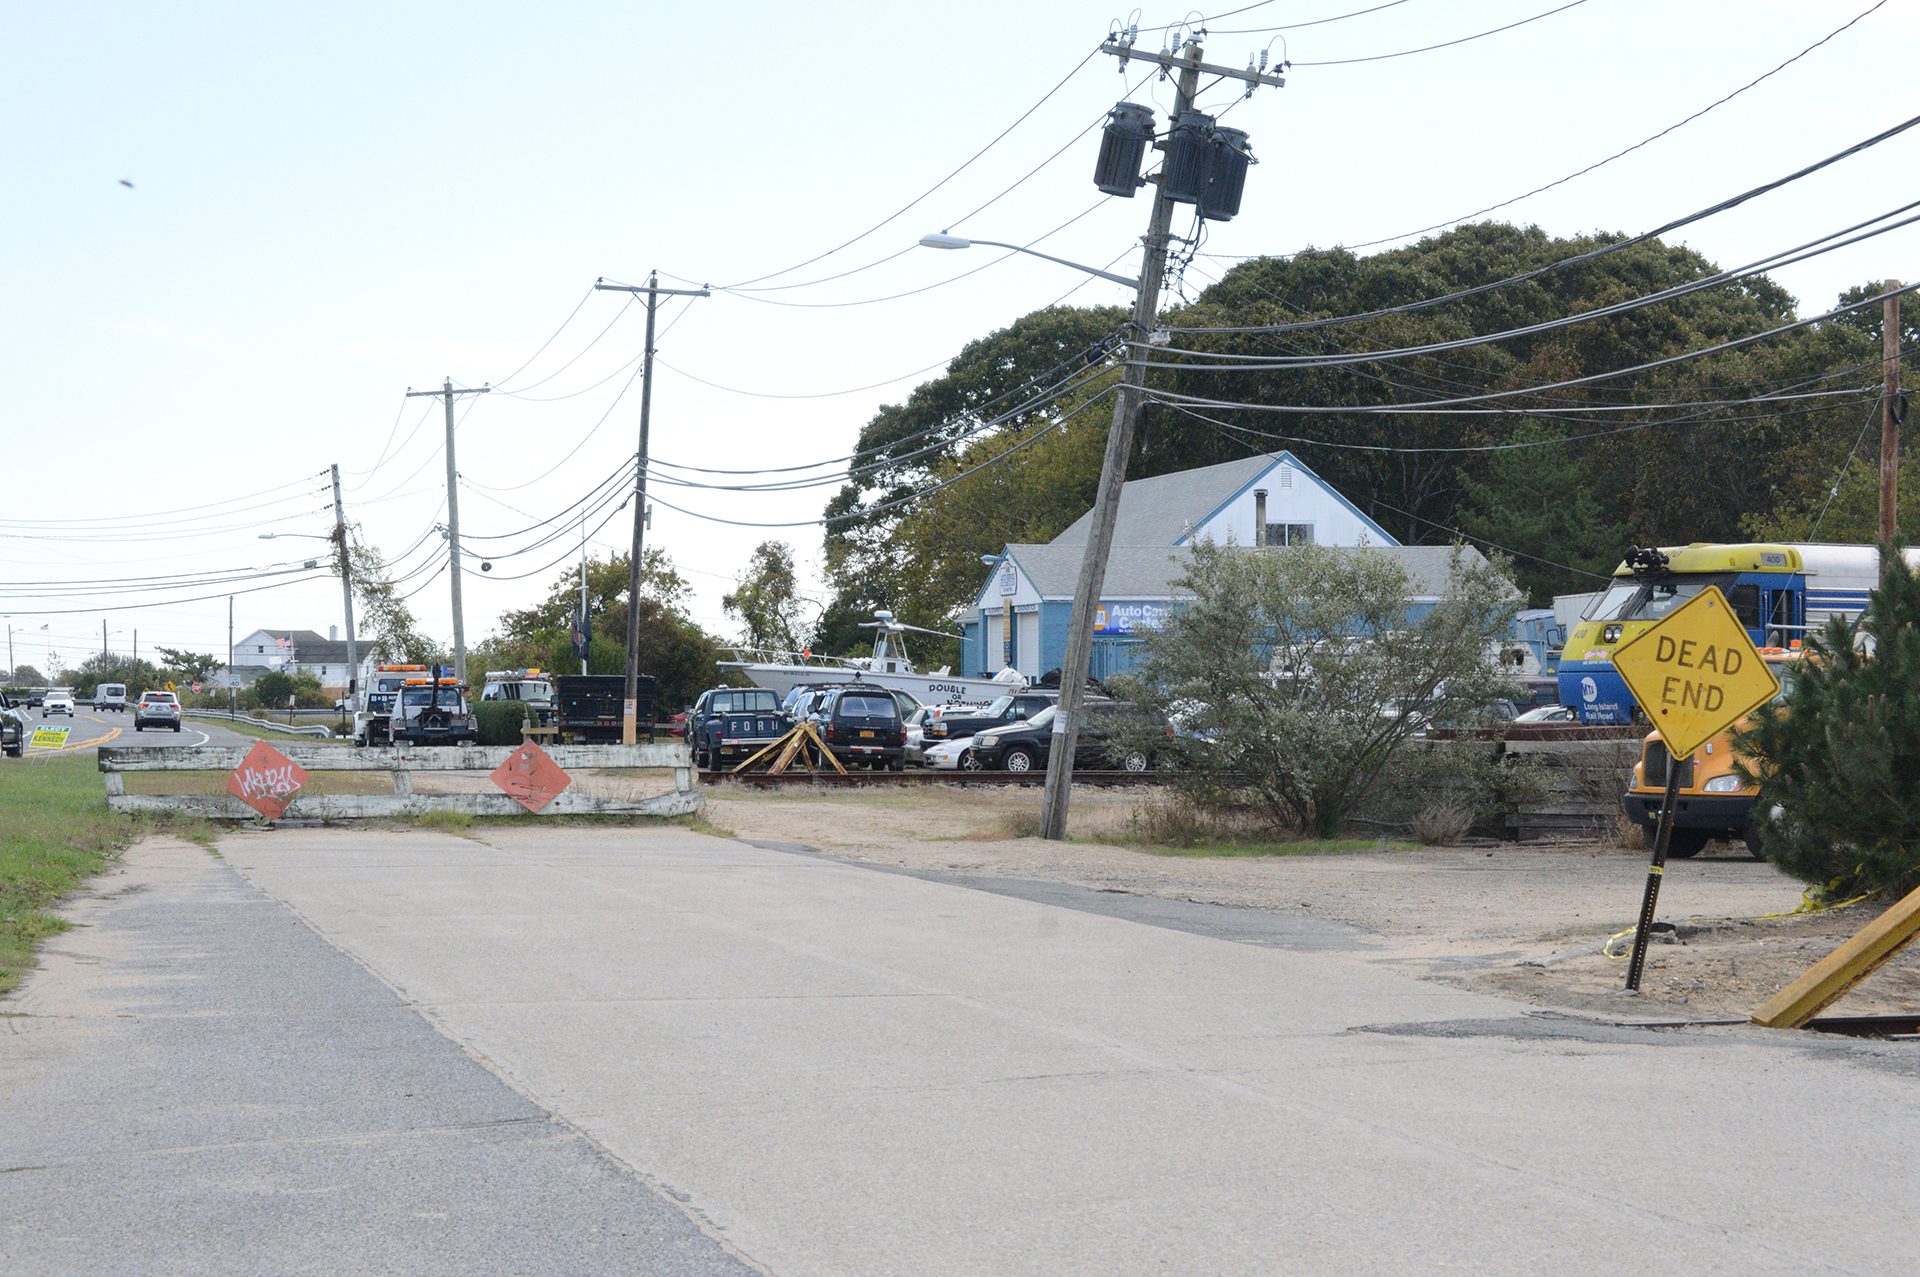 A new dedicated path along Edgemere Street that will begin at the train station and run to downtown Montauk is coming